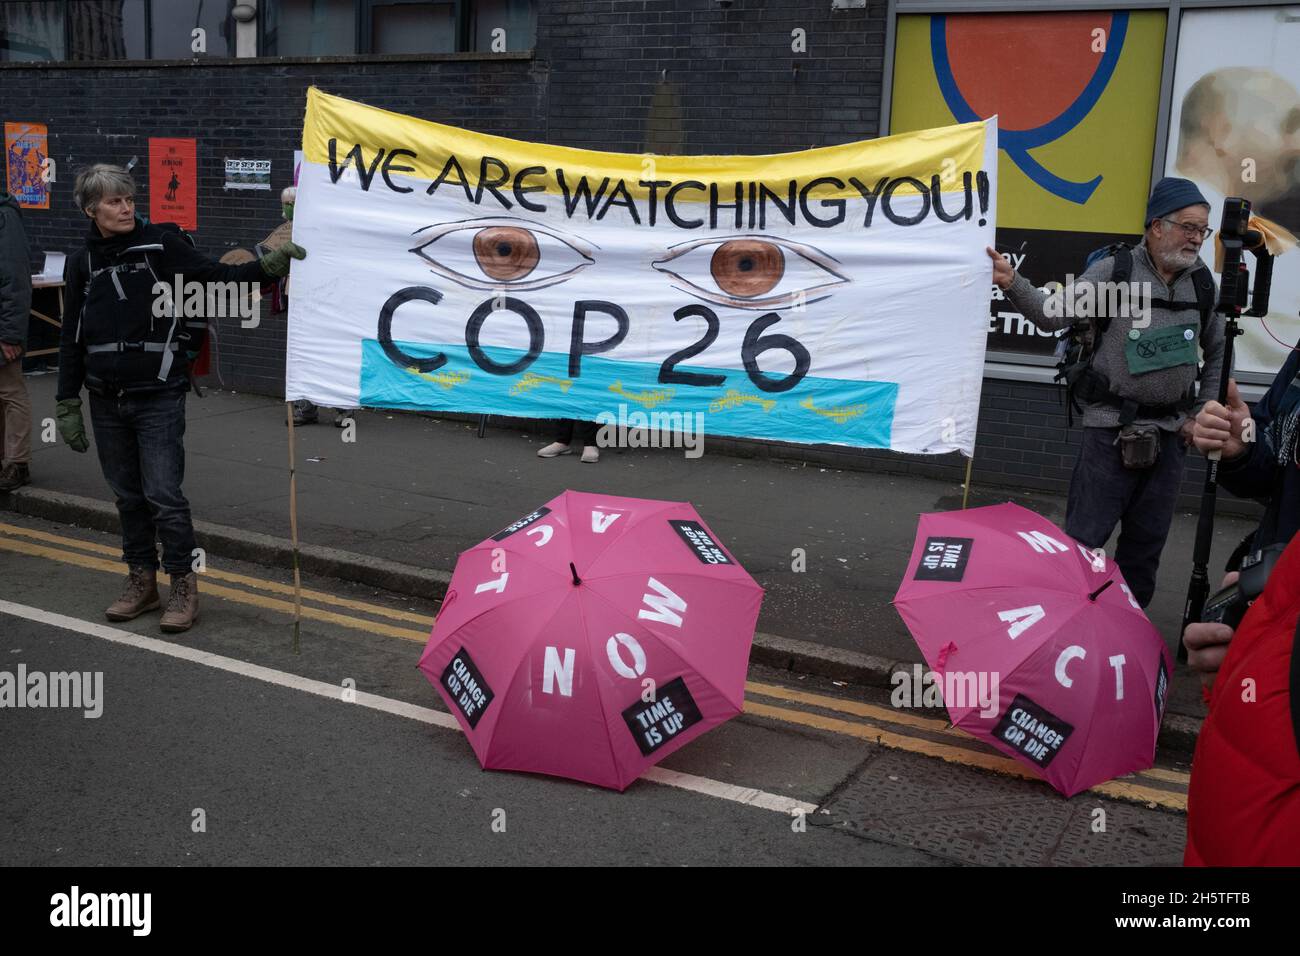 Glasgow, Scotland, UK. Protests at the entrance to the UN Climate Change Conference COP26 venue, in Glasgow, Scotland, on 11th November 2021. Photo: Jeremy Sutton-Hibbert/ Alamy Live News. Stock Photo